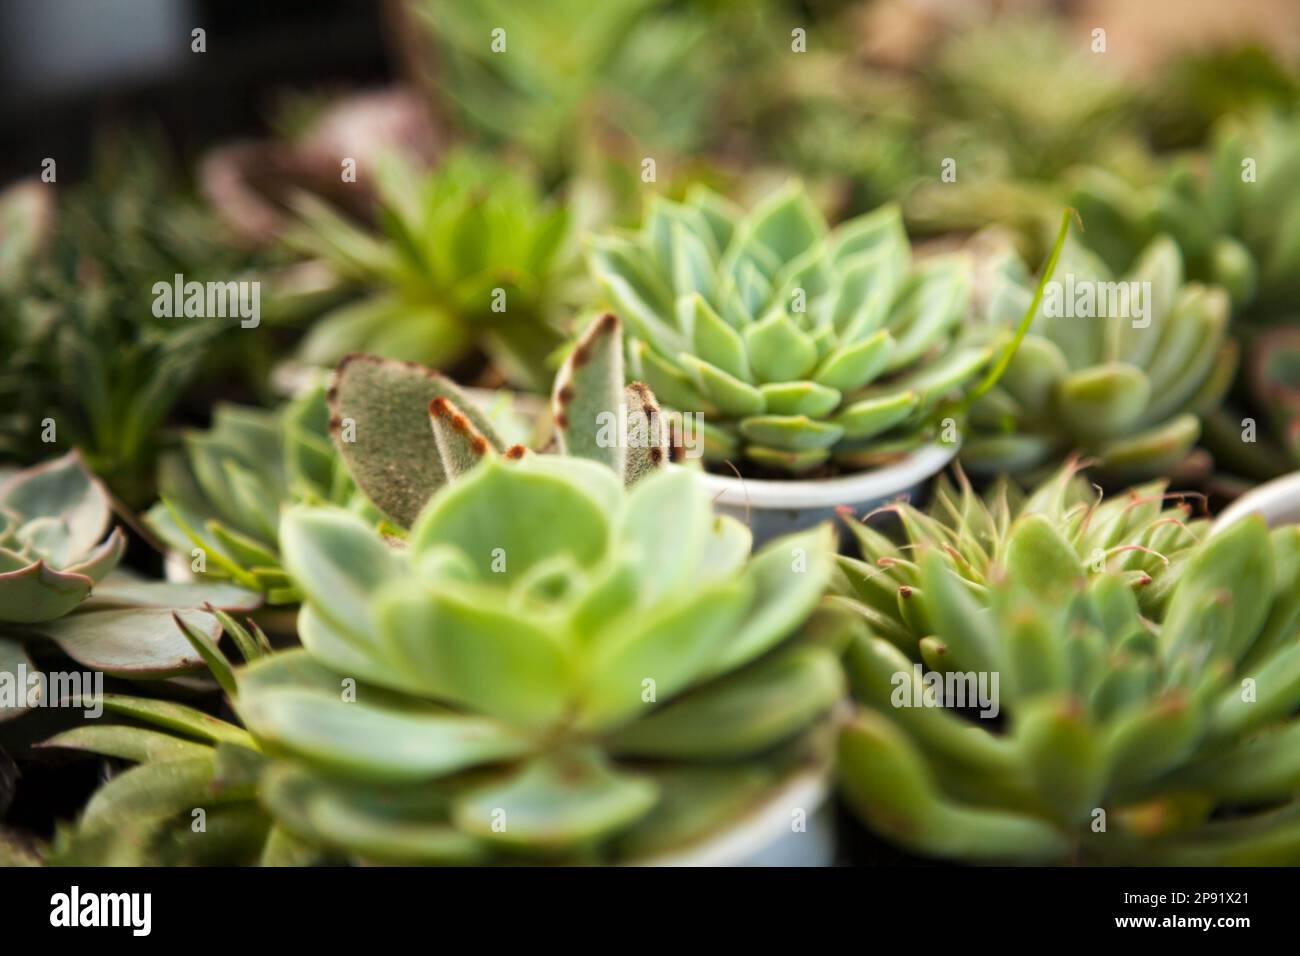 Many little potted succulent home plants. Various small green houseplants in pots background. Cute indoor garden blurred close-up Stock Photo